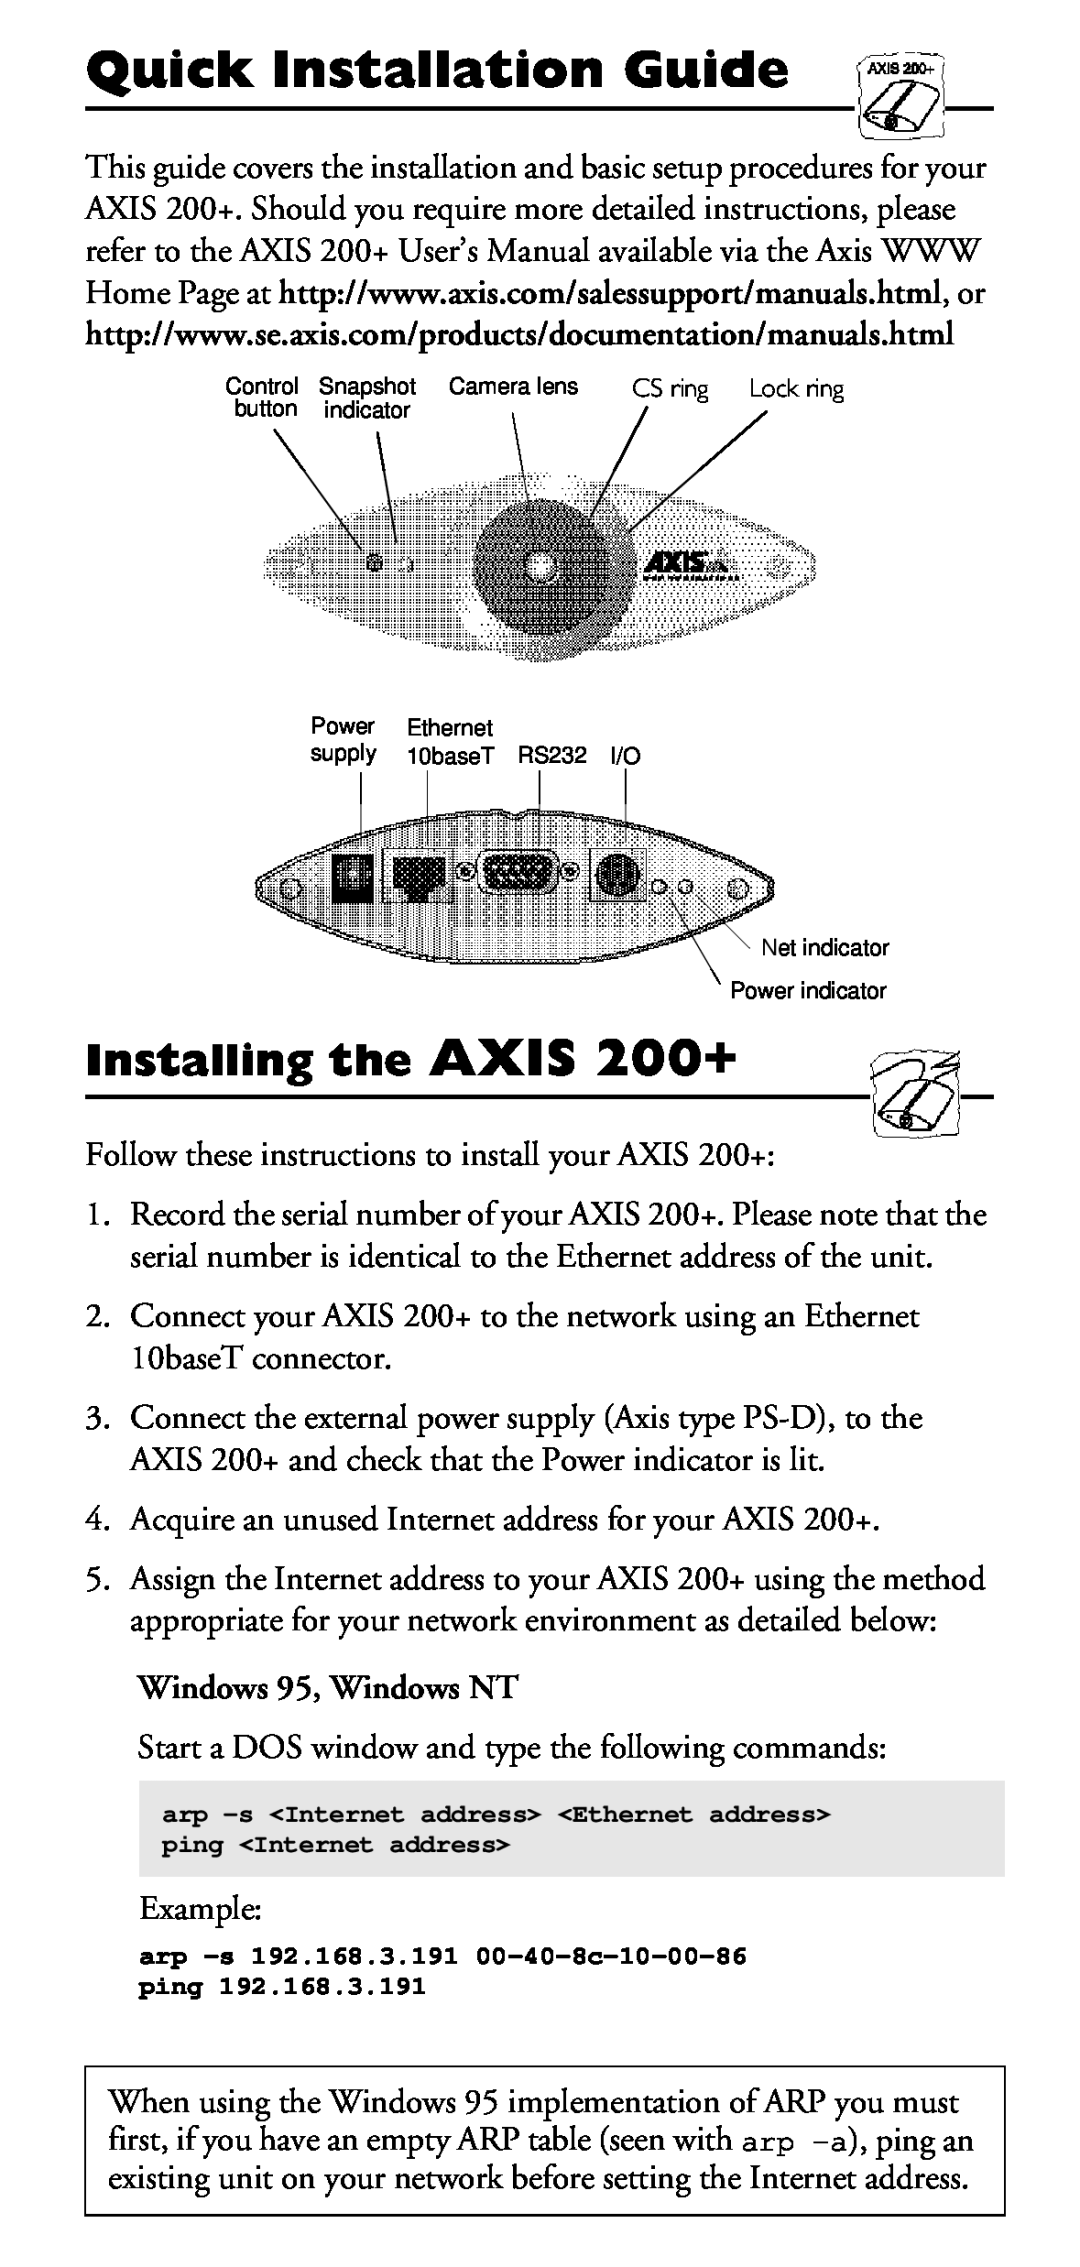 Axis Communications manual Installing the AXIS 200+, Windows 95, Windows NT, Quick Installation Guide 